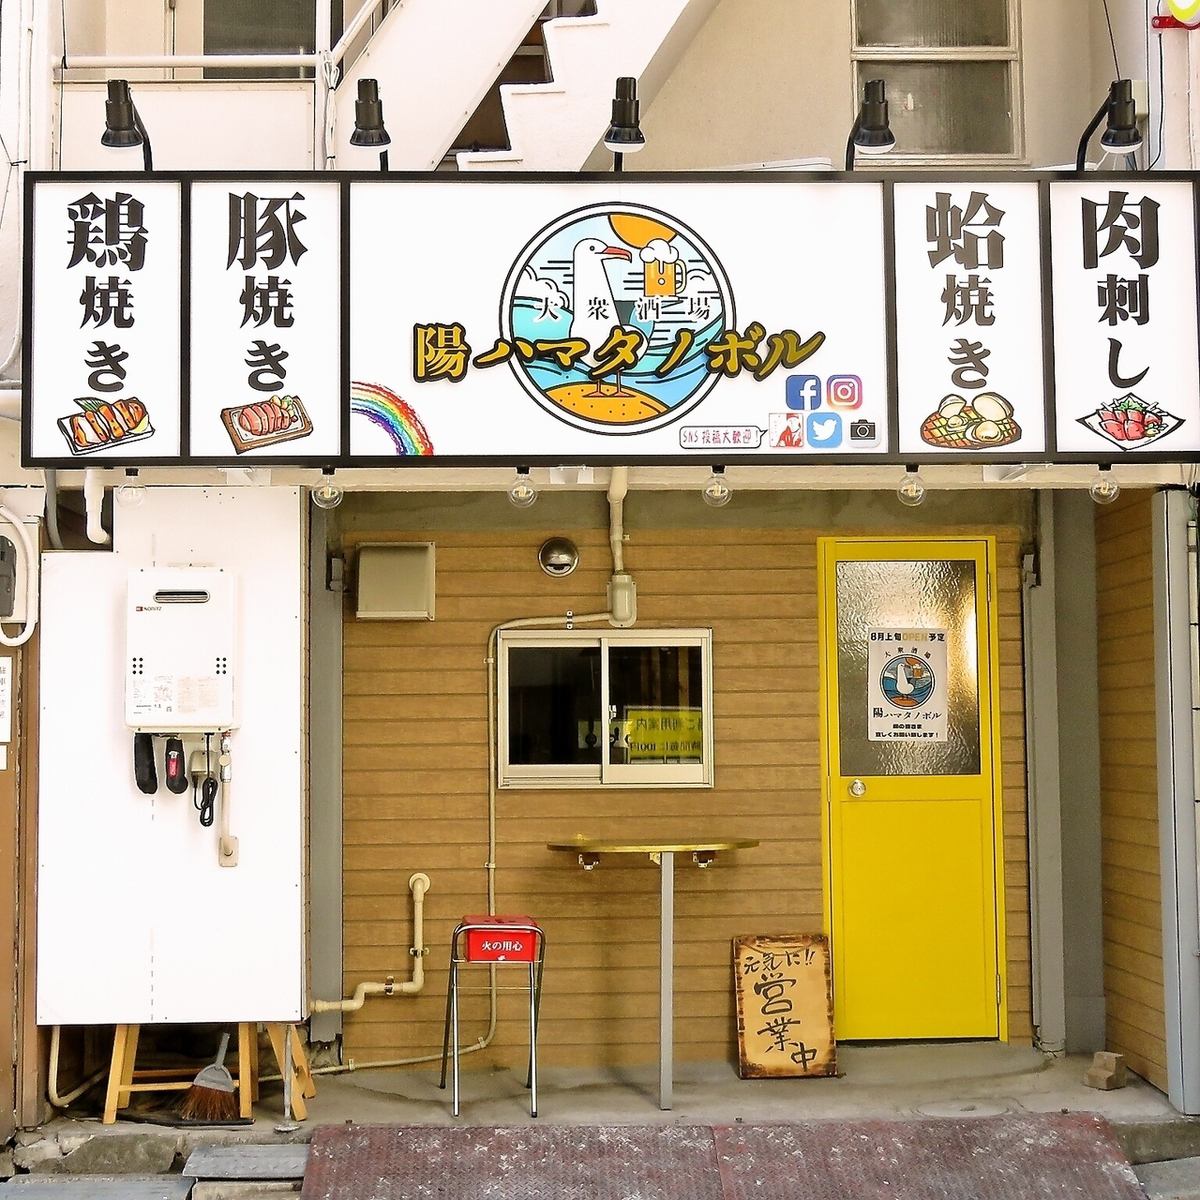 It is an interesting shop that you can enter from the front or the back alley ♪